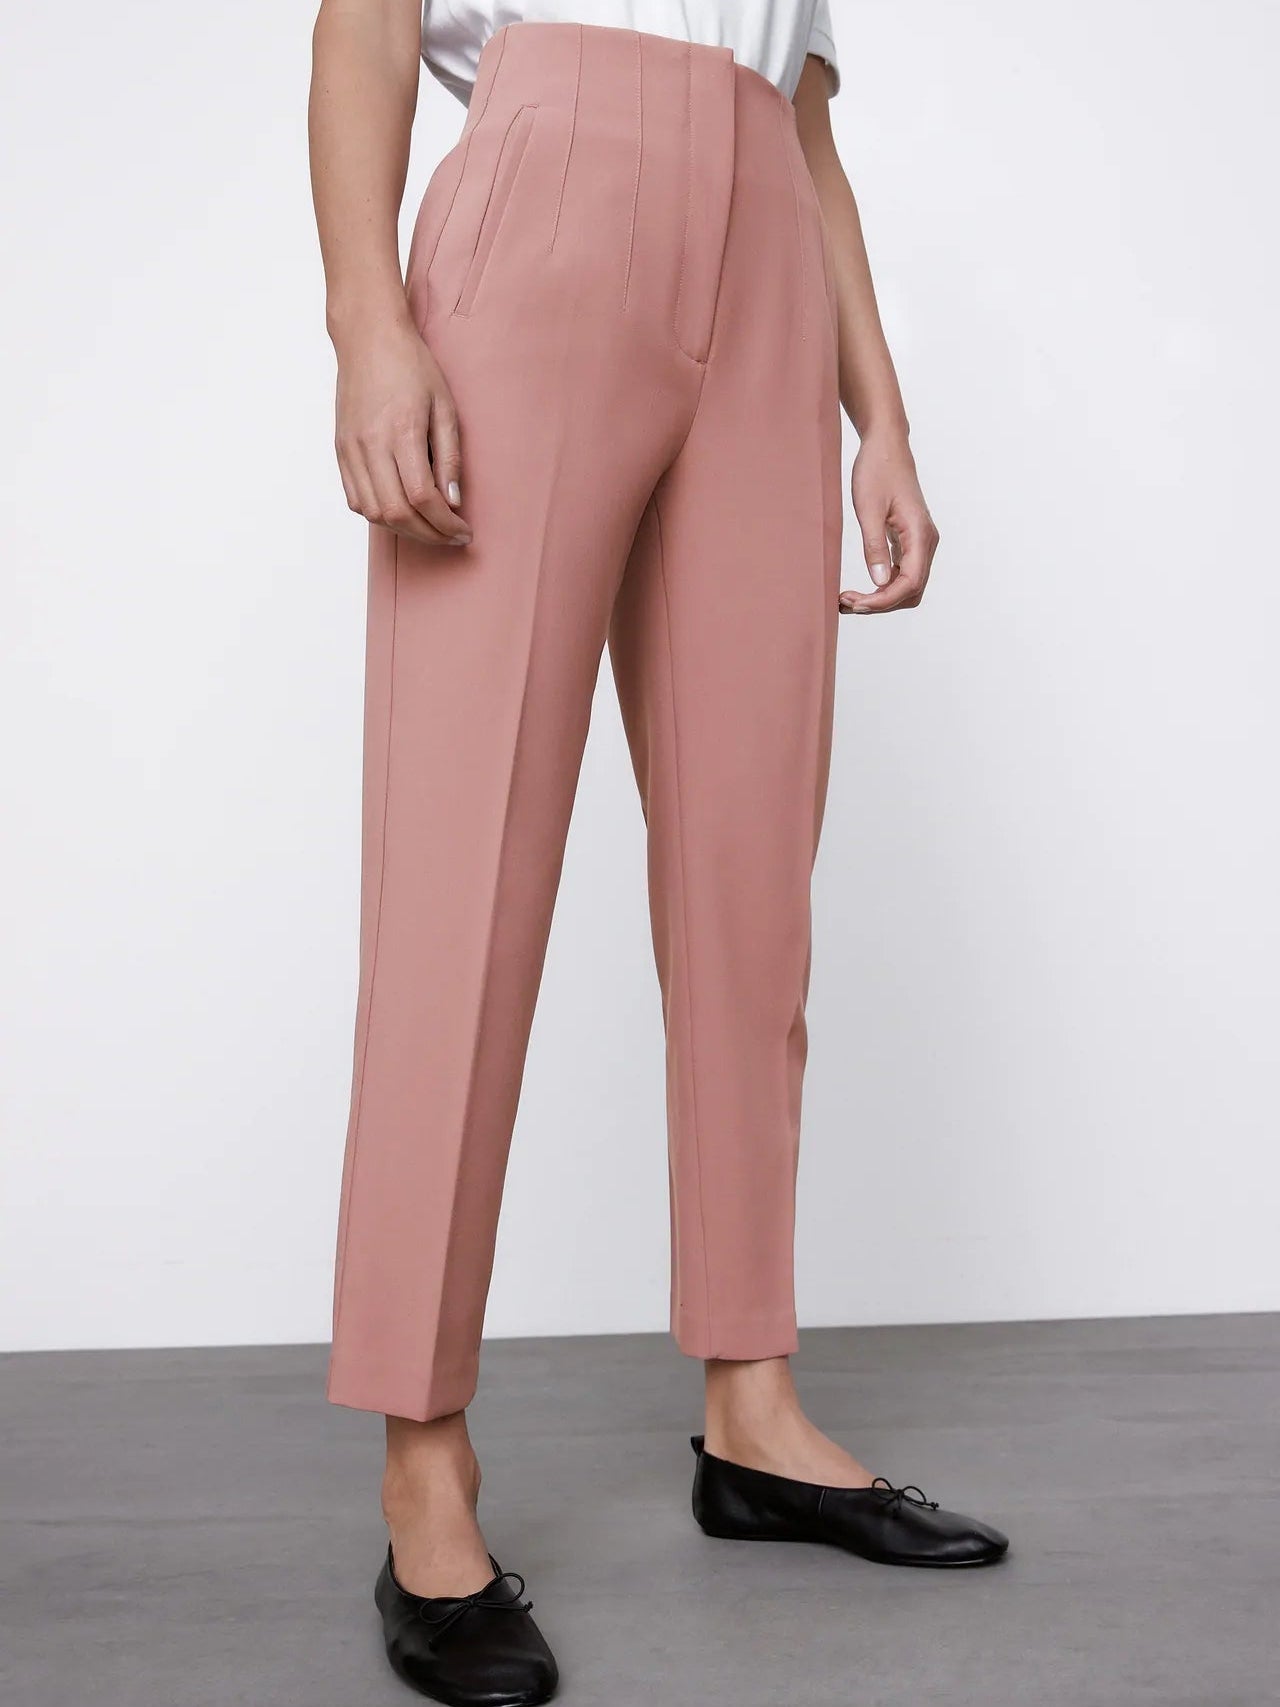 Zara Ankle & Cropped Pants & Jumpsuits for Women - Poshmark